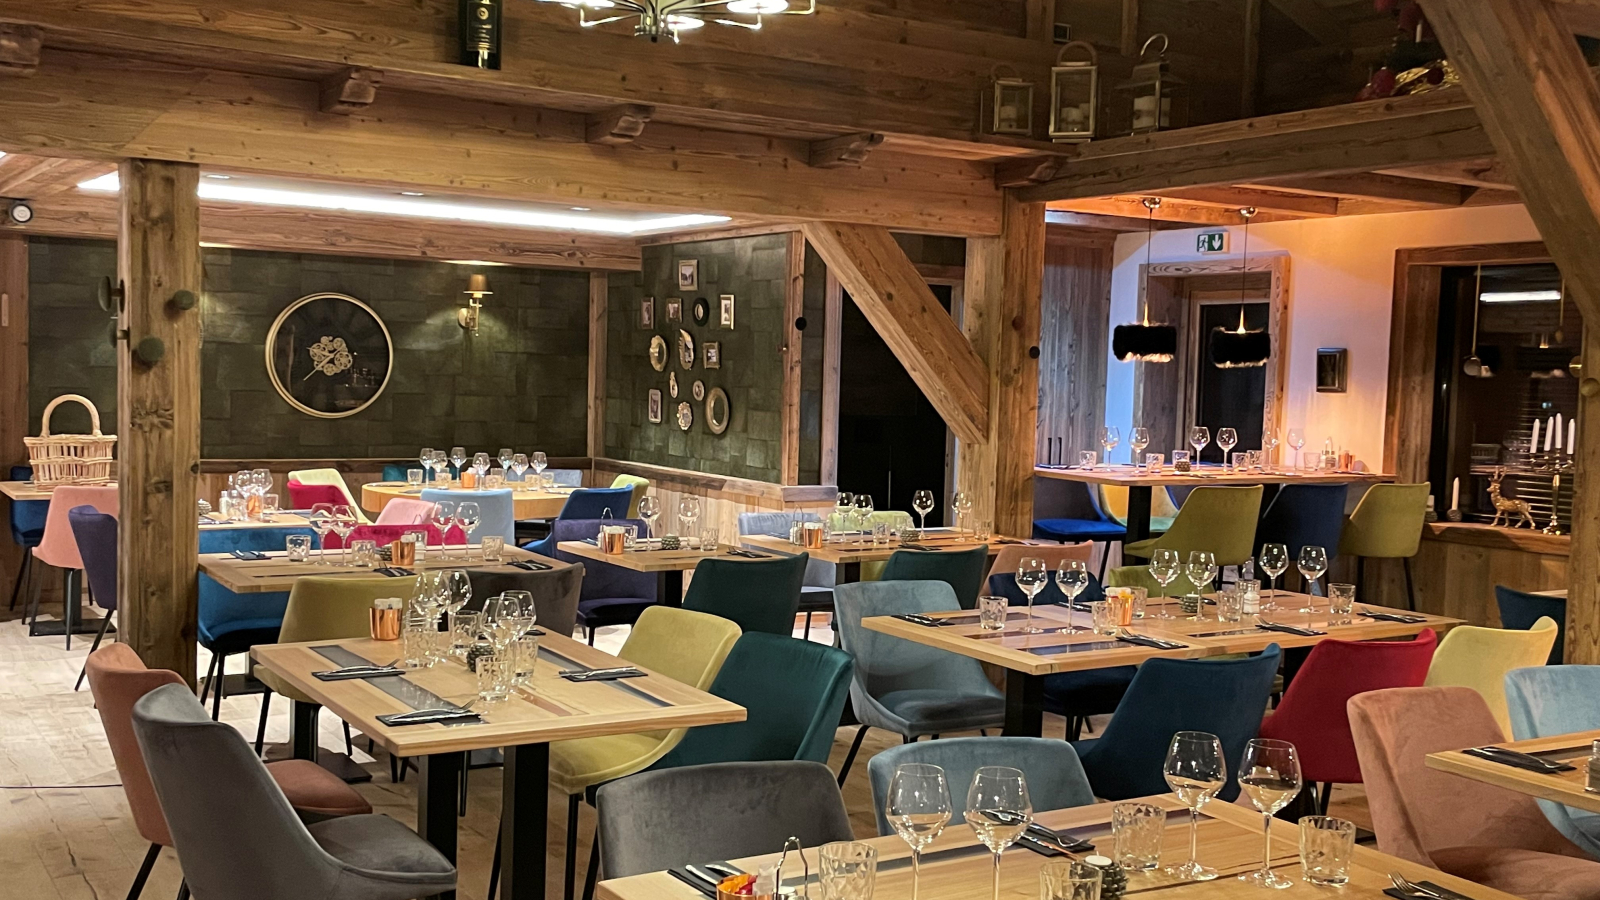 L'Alpage d'Augustin, restaurant on the slopes in Val Cenis